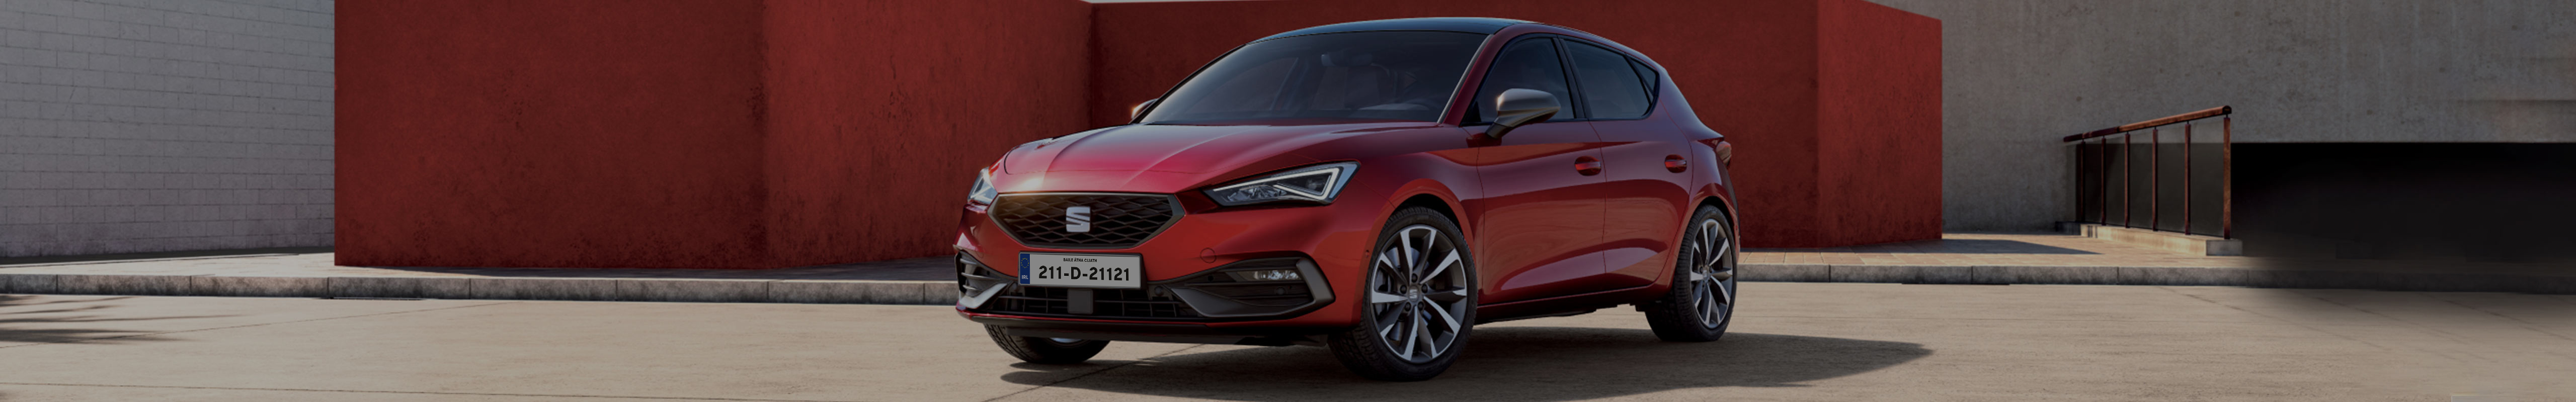 New SEAT Leon 211 offers